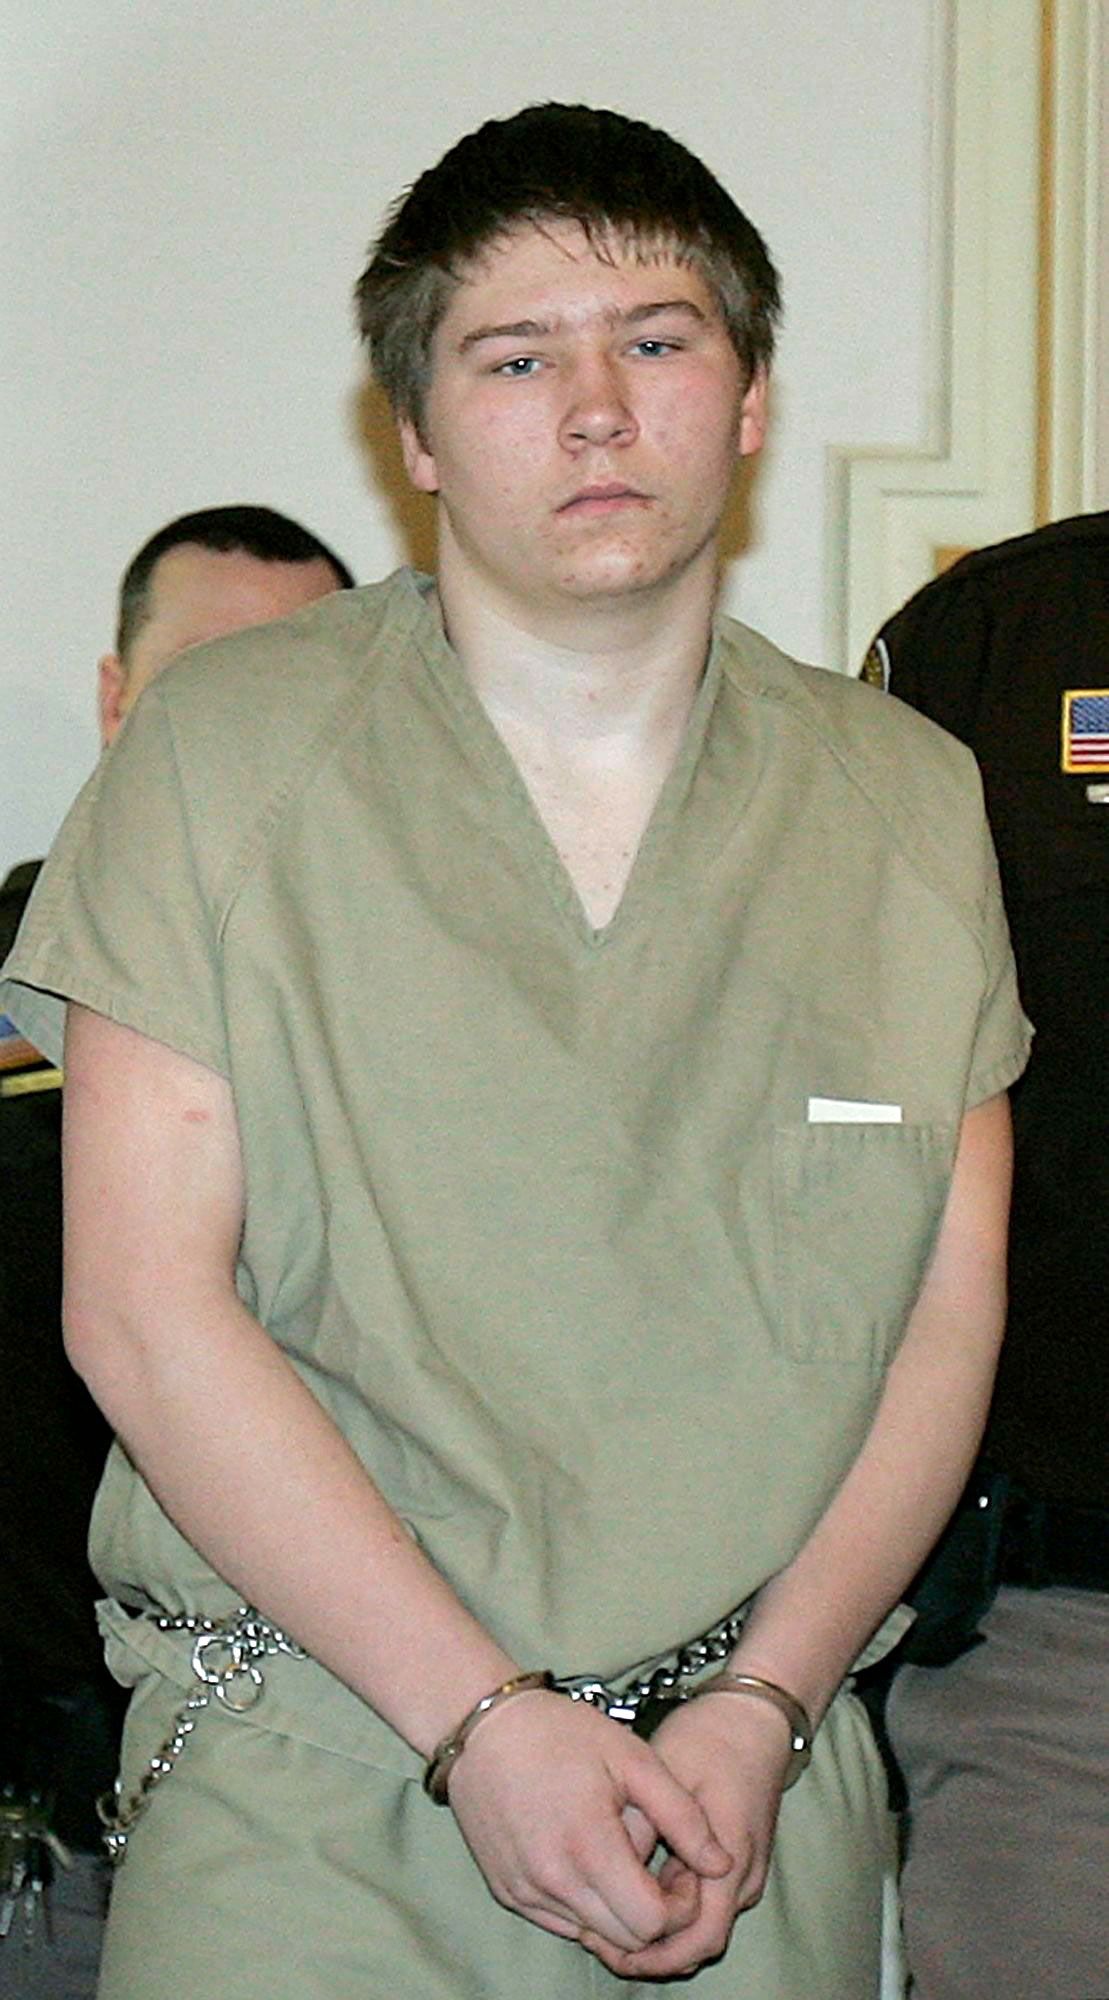 Brendan Dassey News, Articles, Stories & Trends for Today